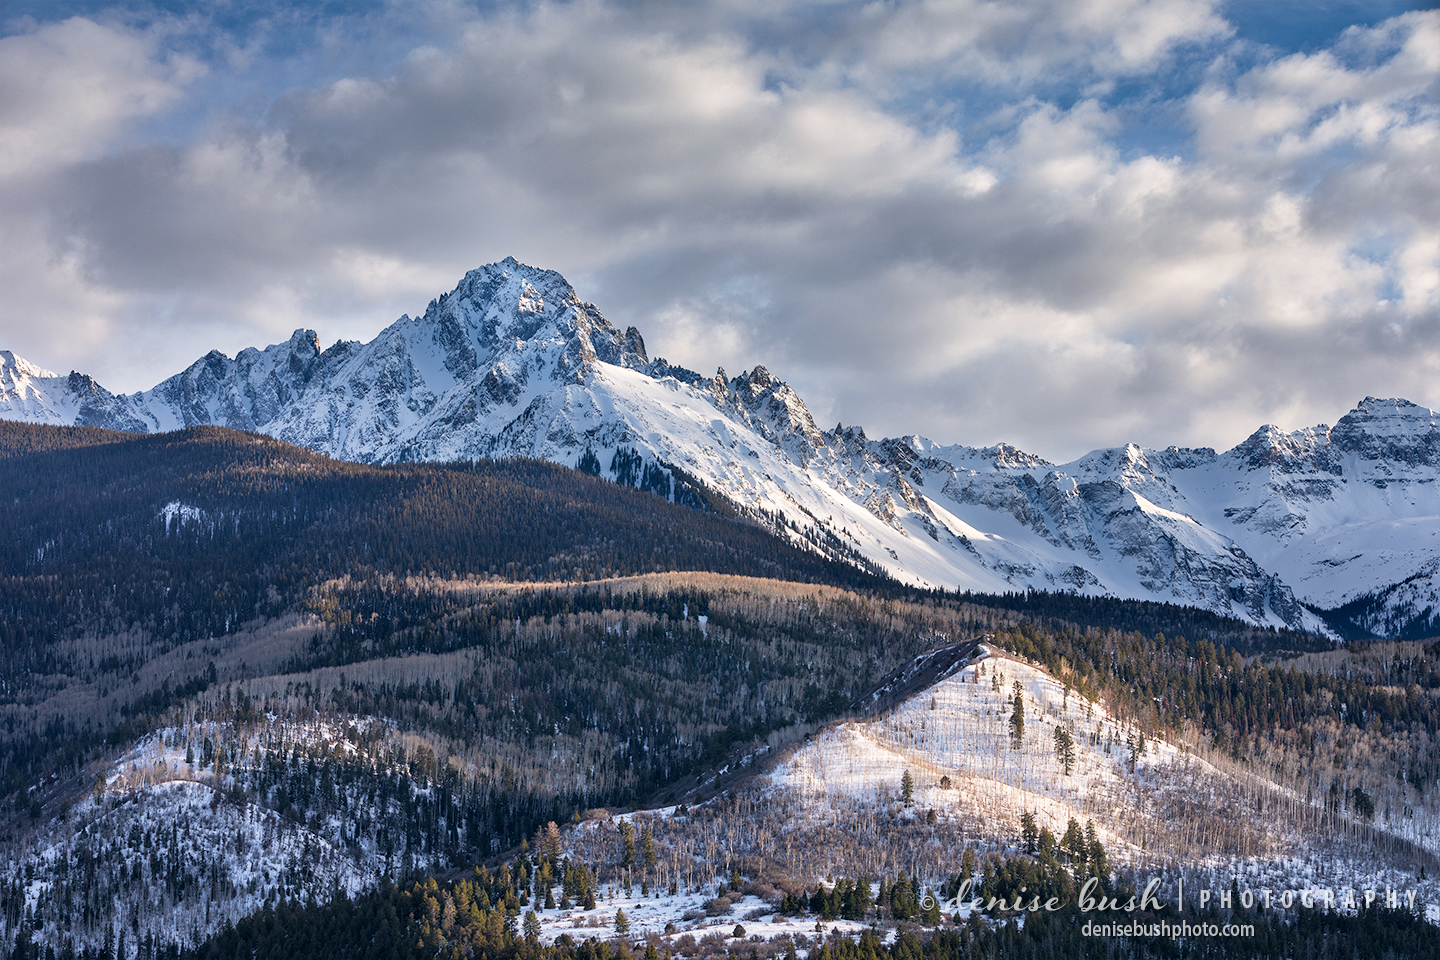 This winter image shot in the San Juans of Colorado features Mount Sneffels which rises to 14,158 feet in elevation.